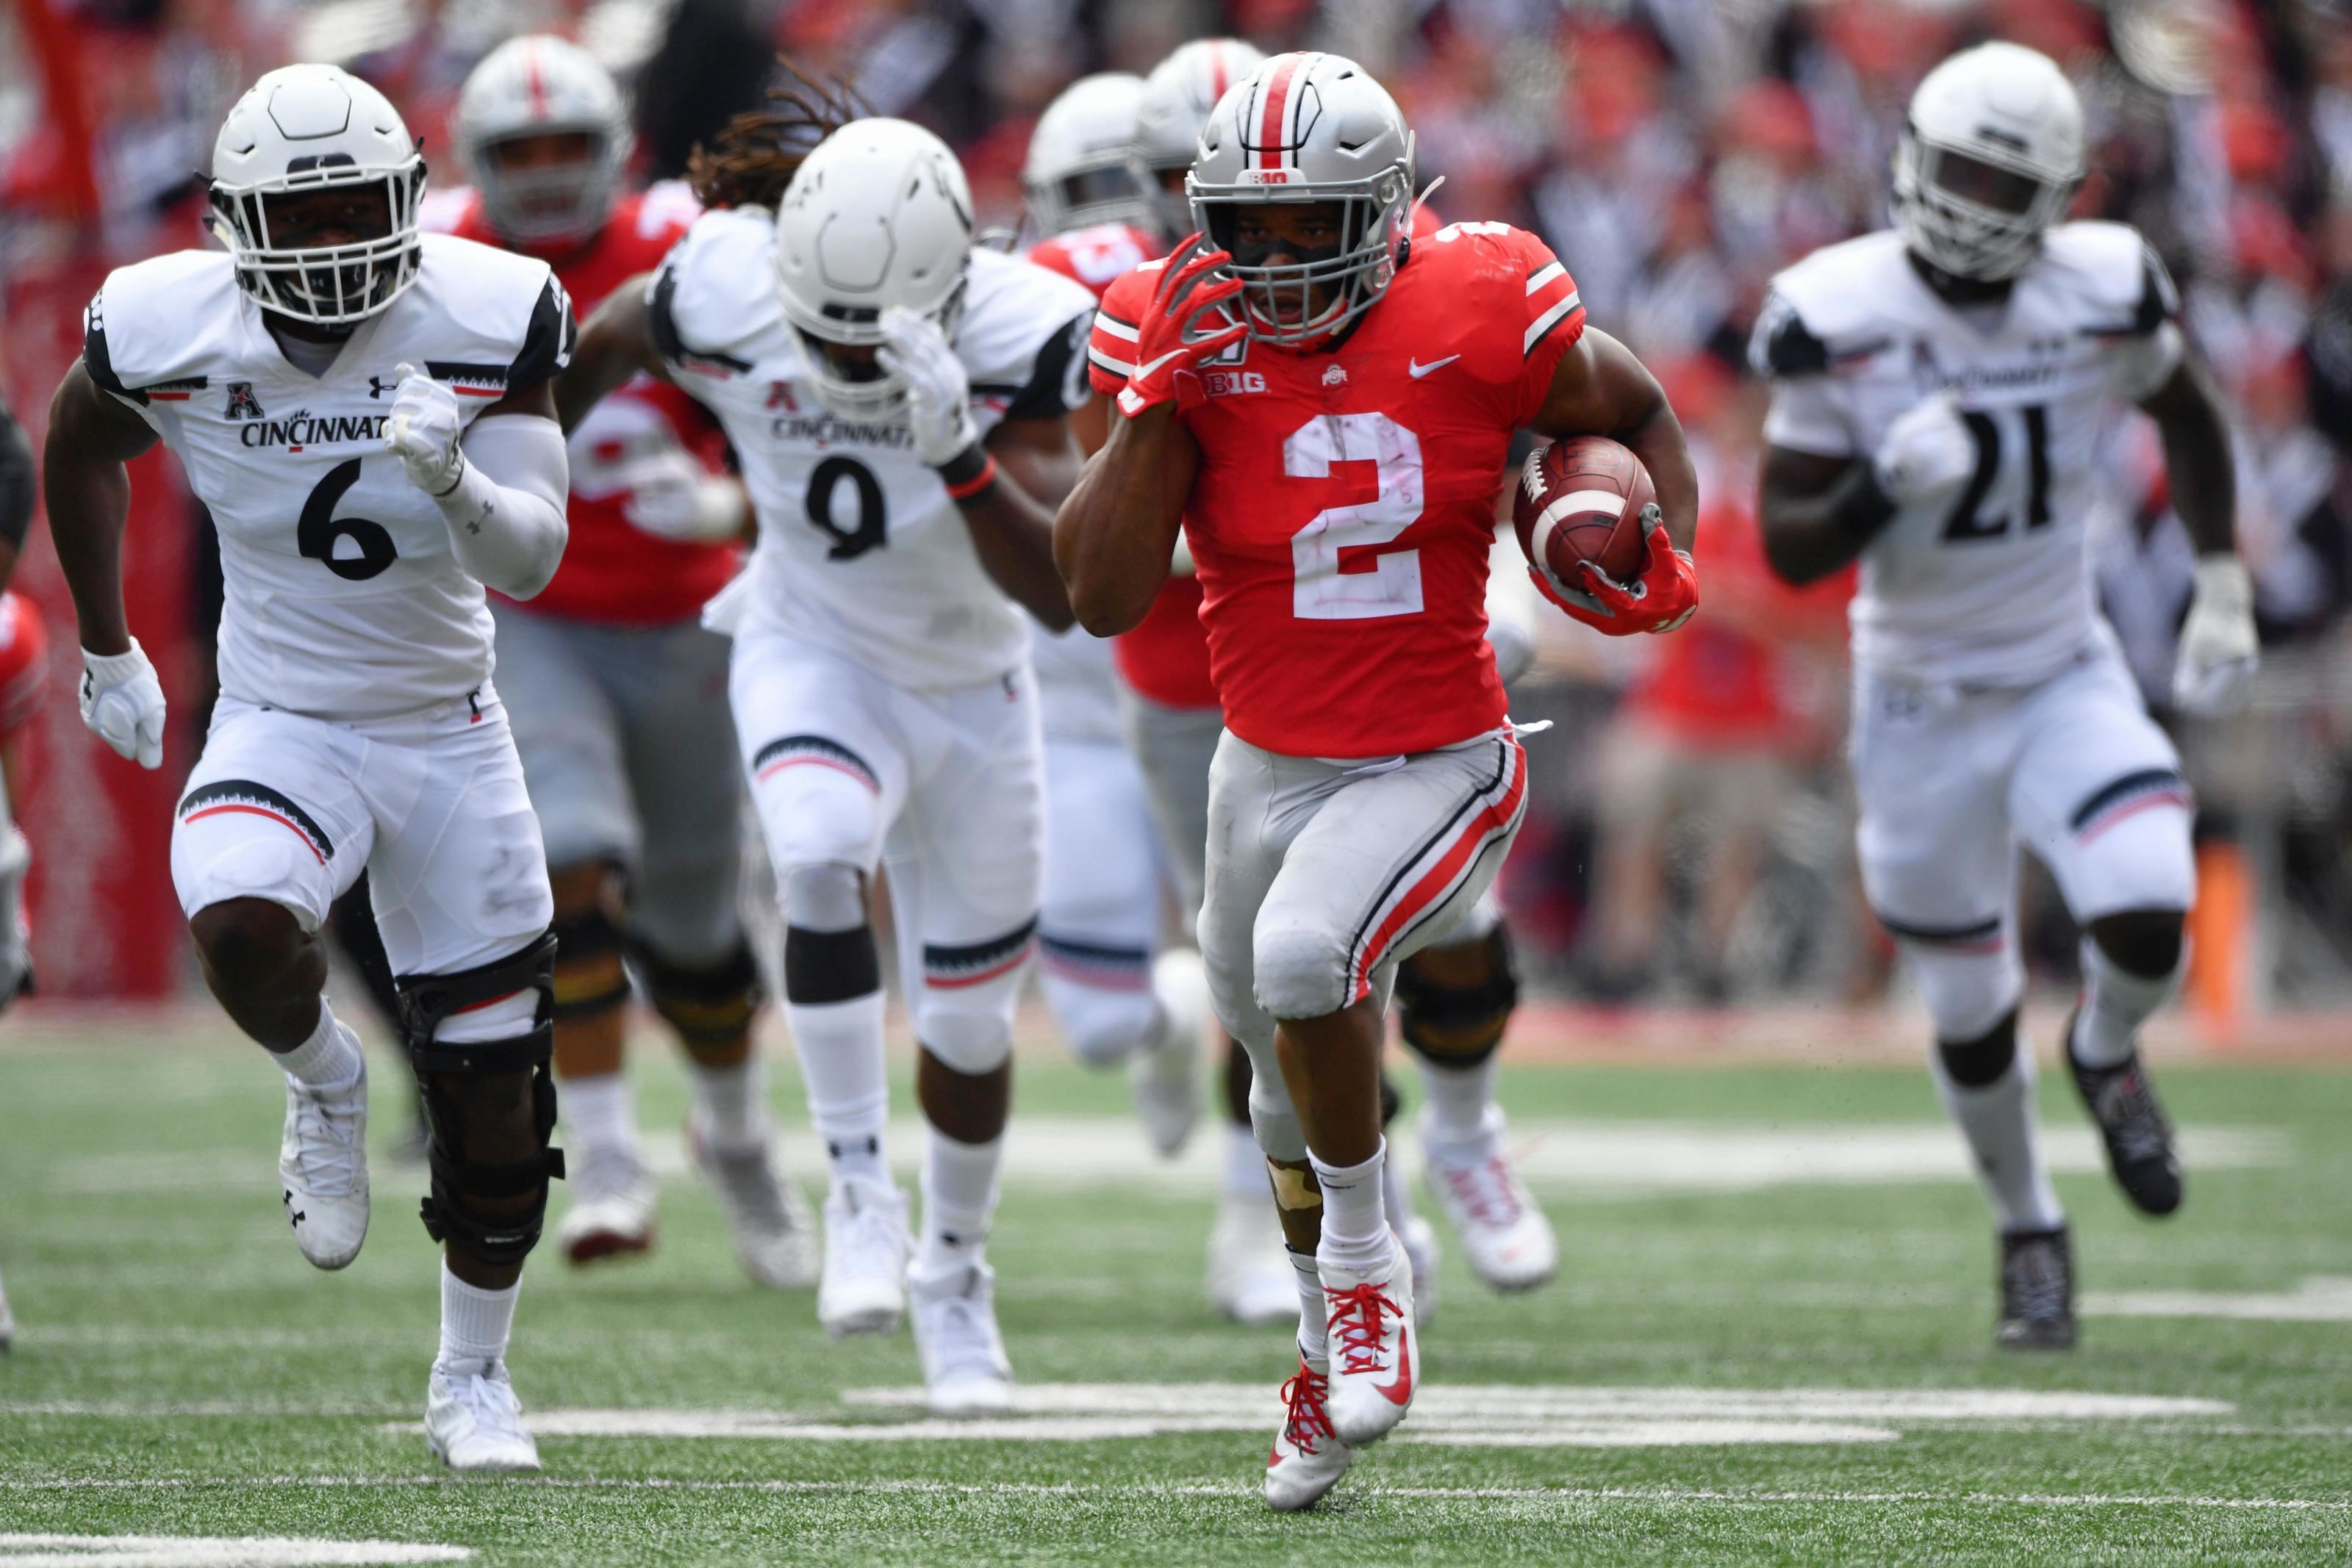 Ohio State Football Predictions for Buckeyes vs. Spartans